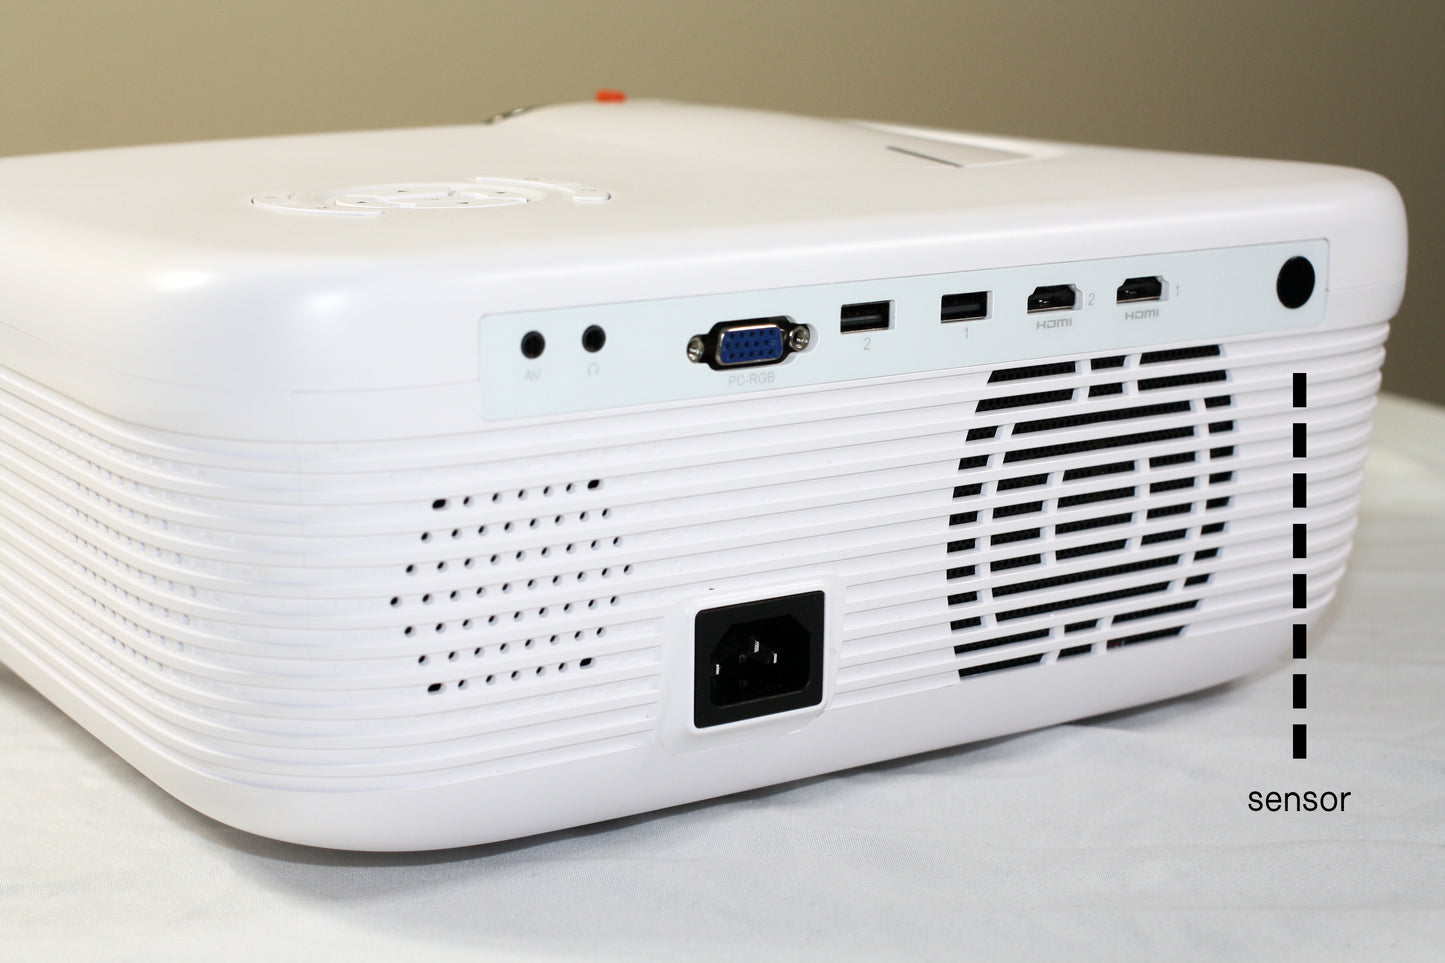 TEXONIC 1080p LED Home Theatre Projector: Crystal Clear Cinema Experience